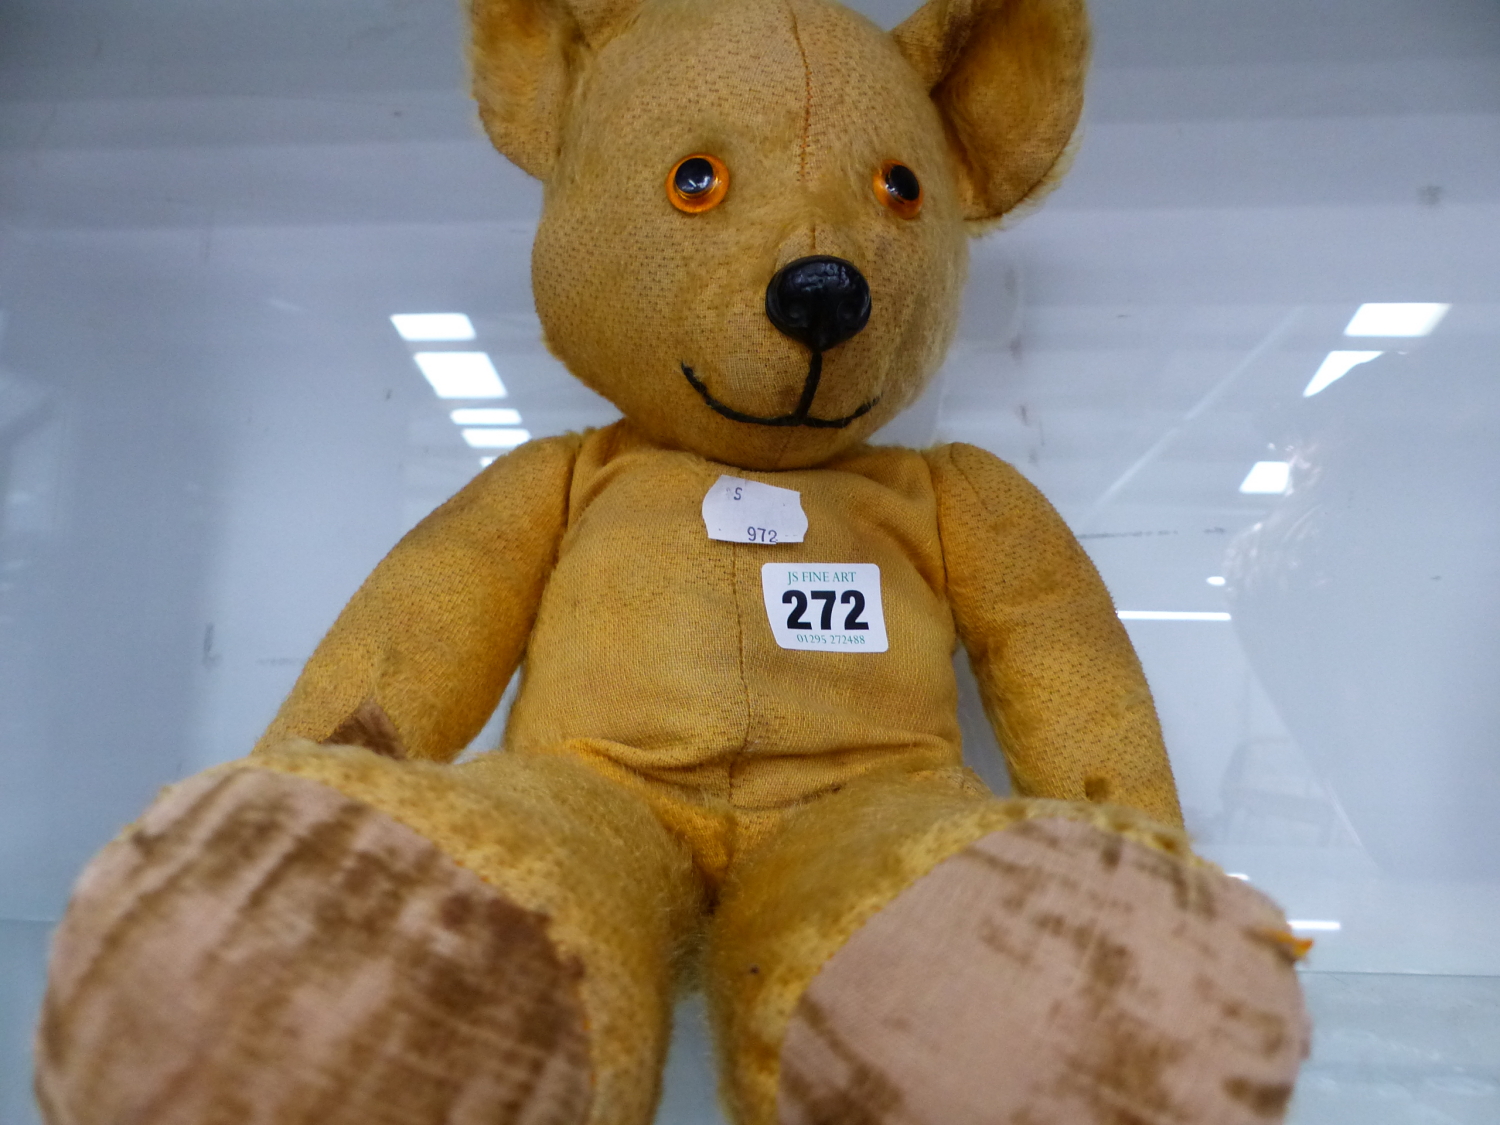 A VINTAGE JOINTED TEDDY BEAR - Image 2 of 2